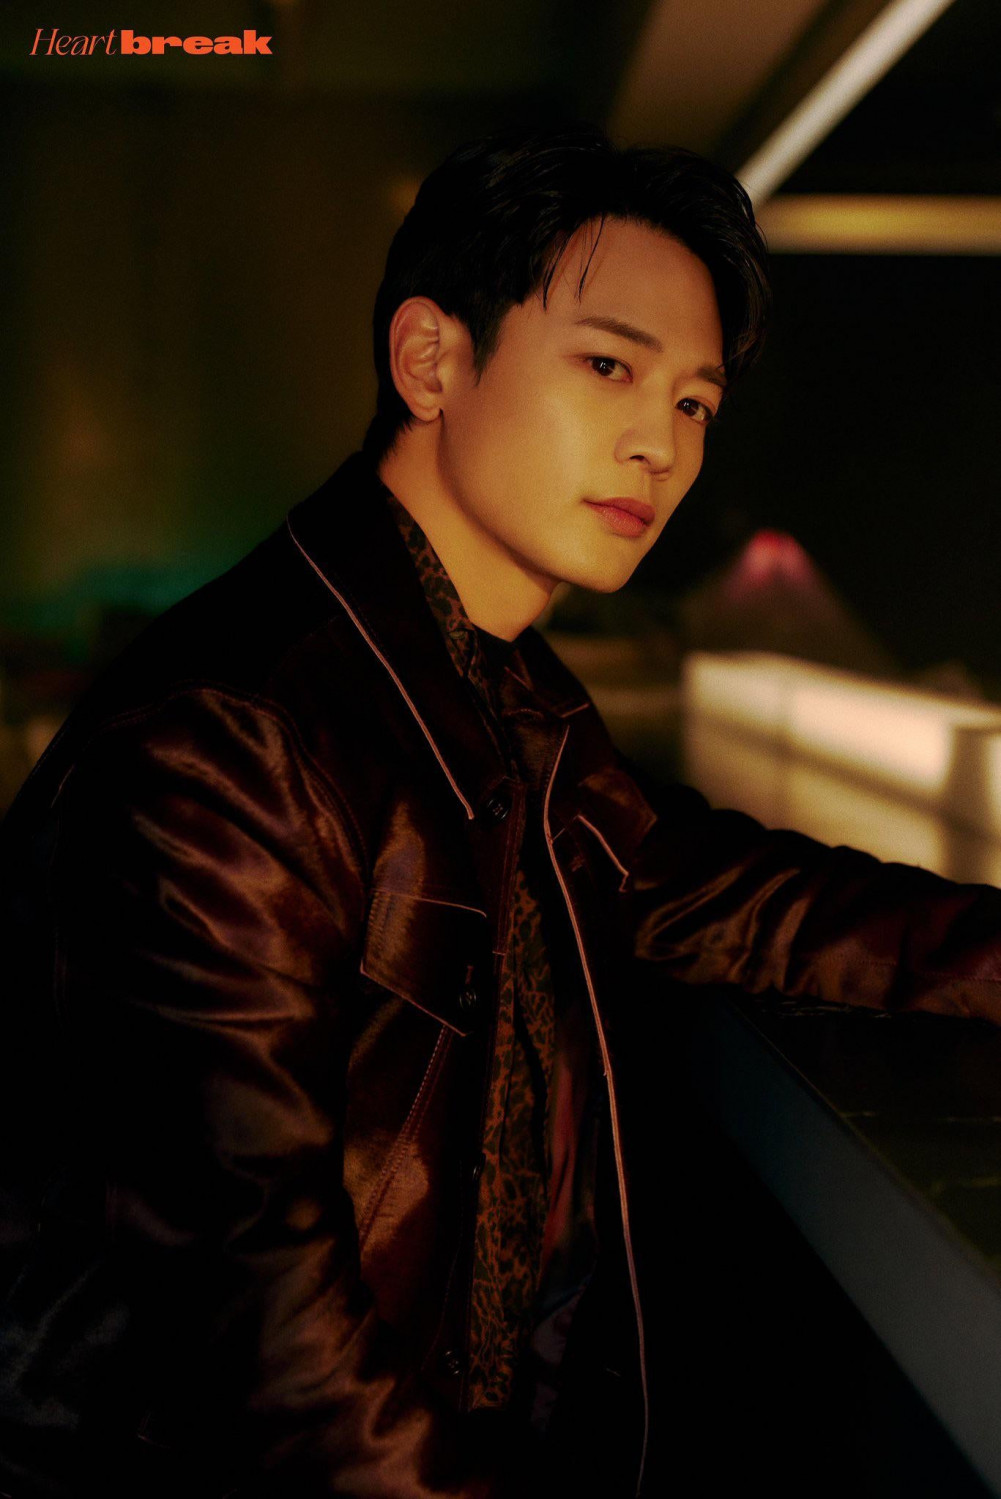 SHINee's Minho makes fans' hearts race with first teaser images for ...